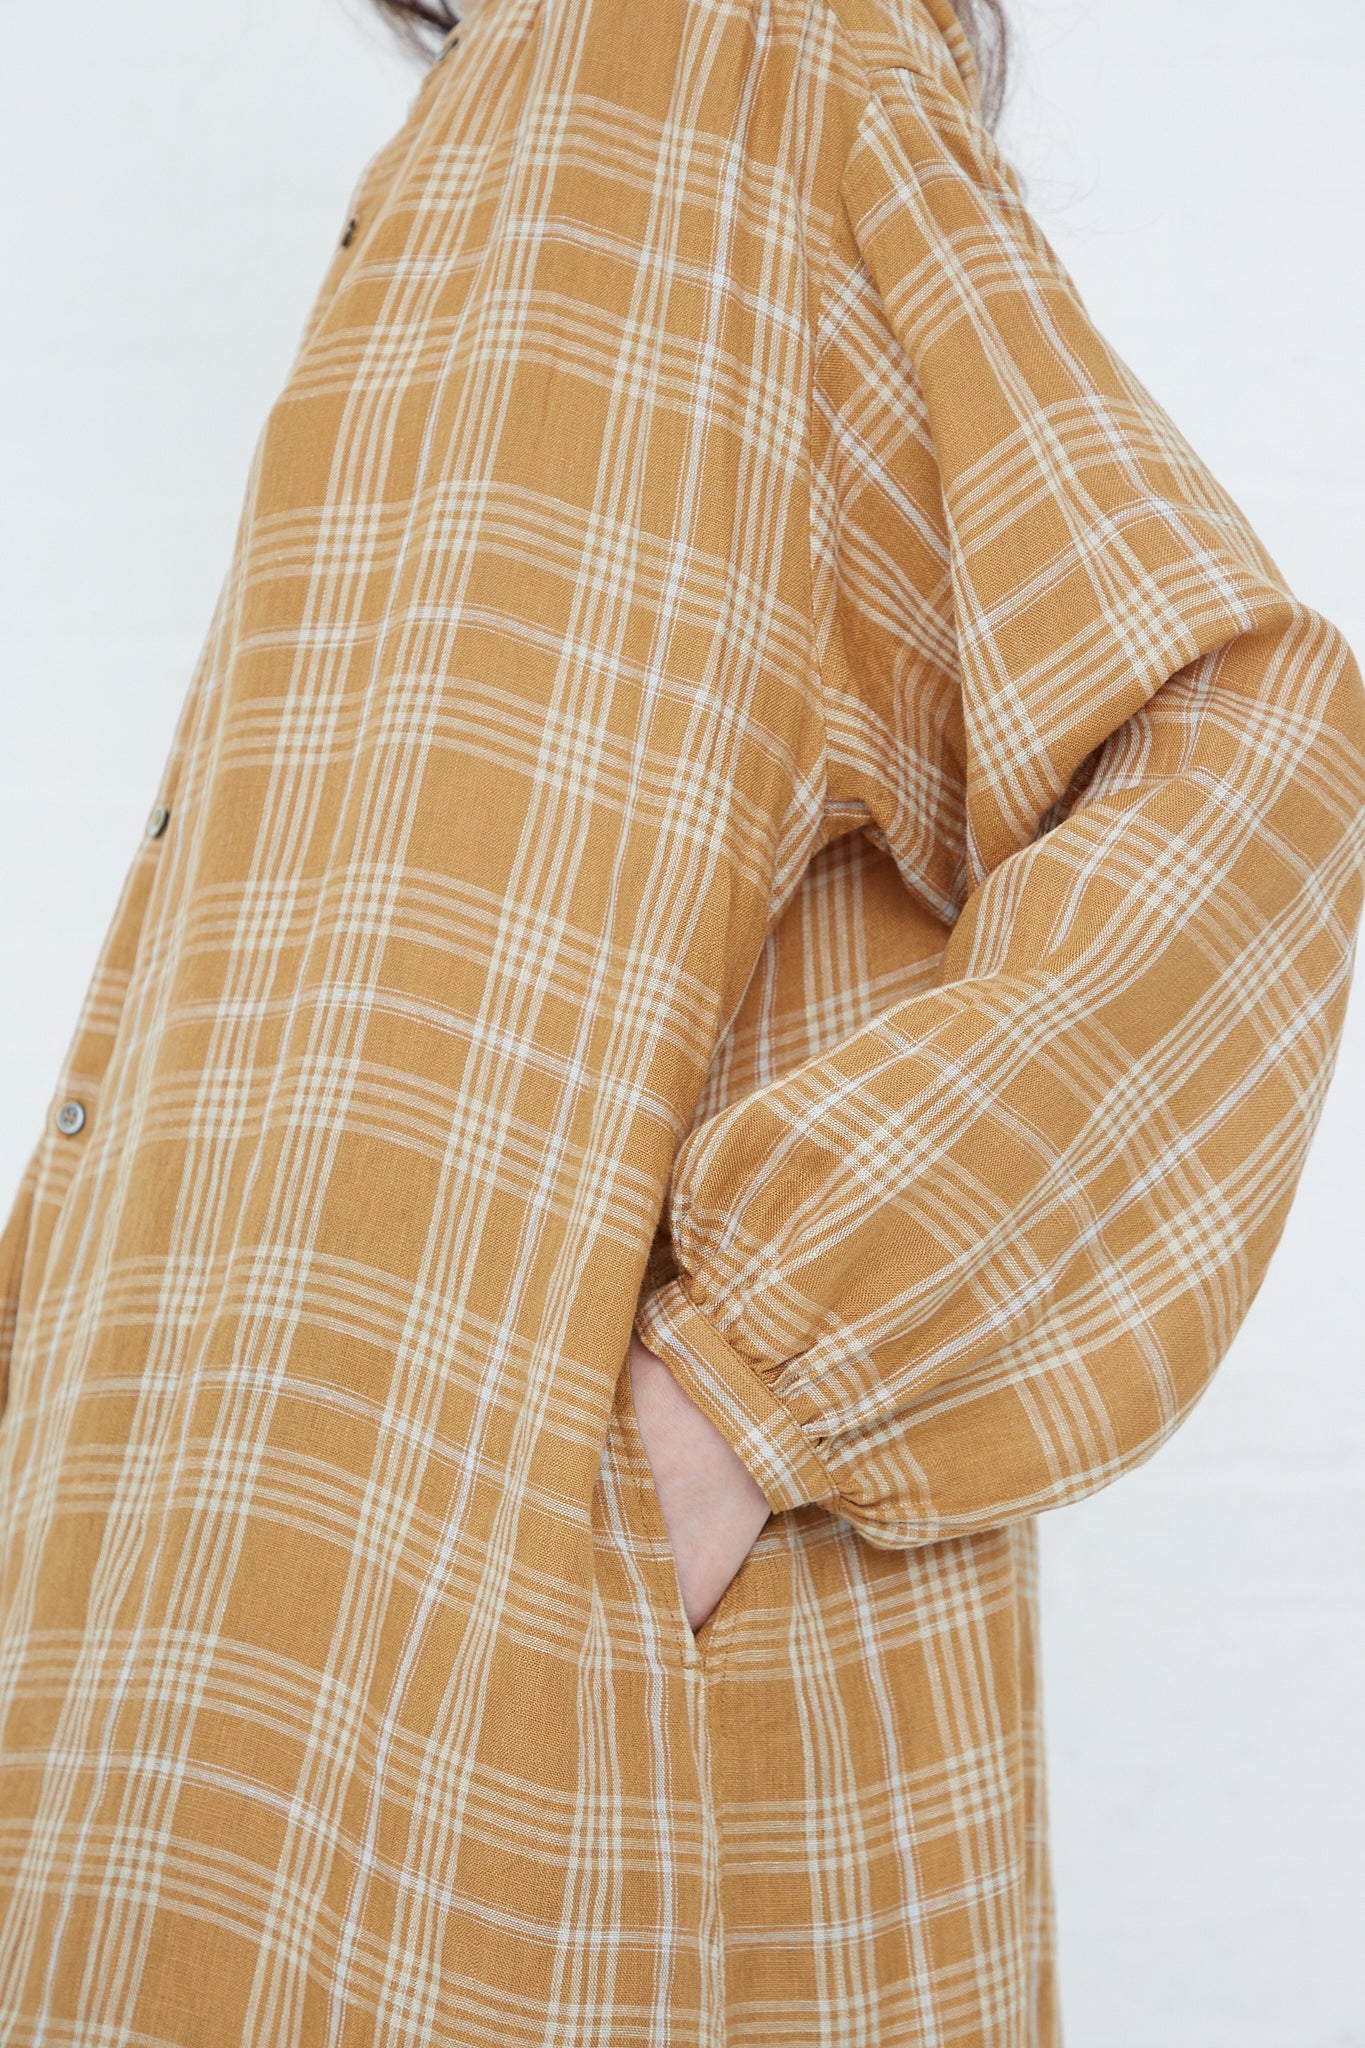 A woman wearing a relaxed fit, long sleeve Linen Check Dress in Camel shirt by Ichi Antiquités.